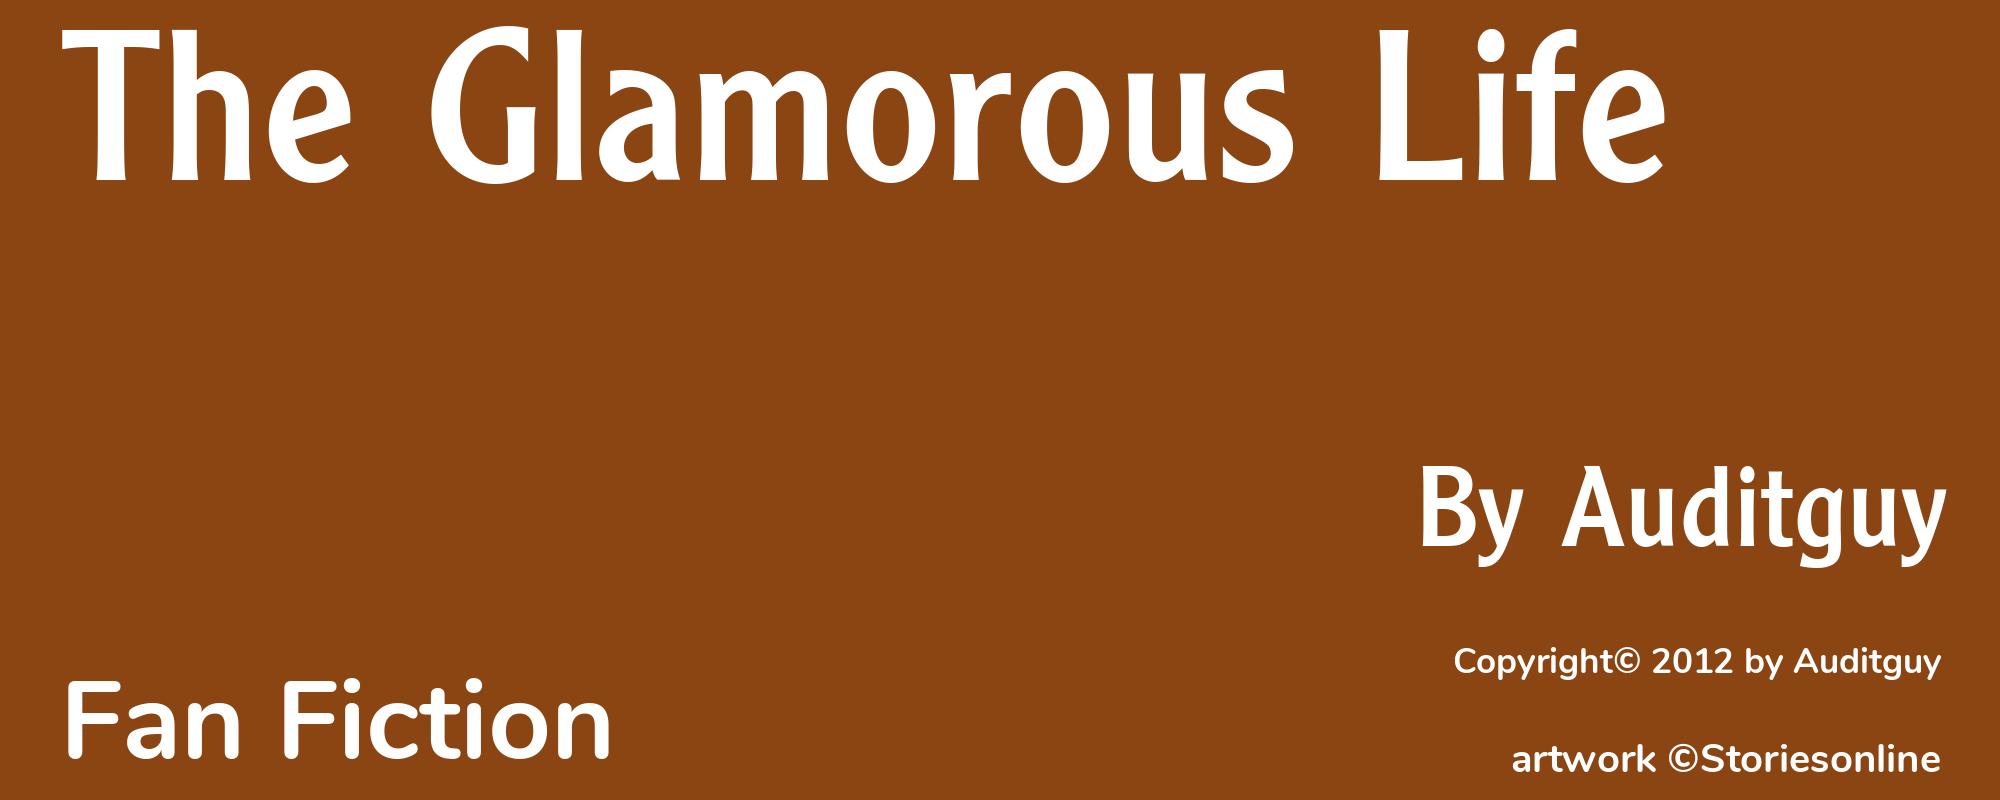 The Glamorous Life - Cover